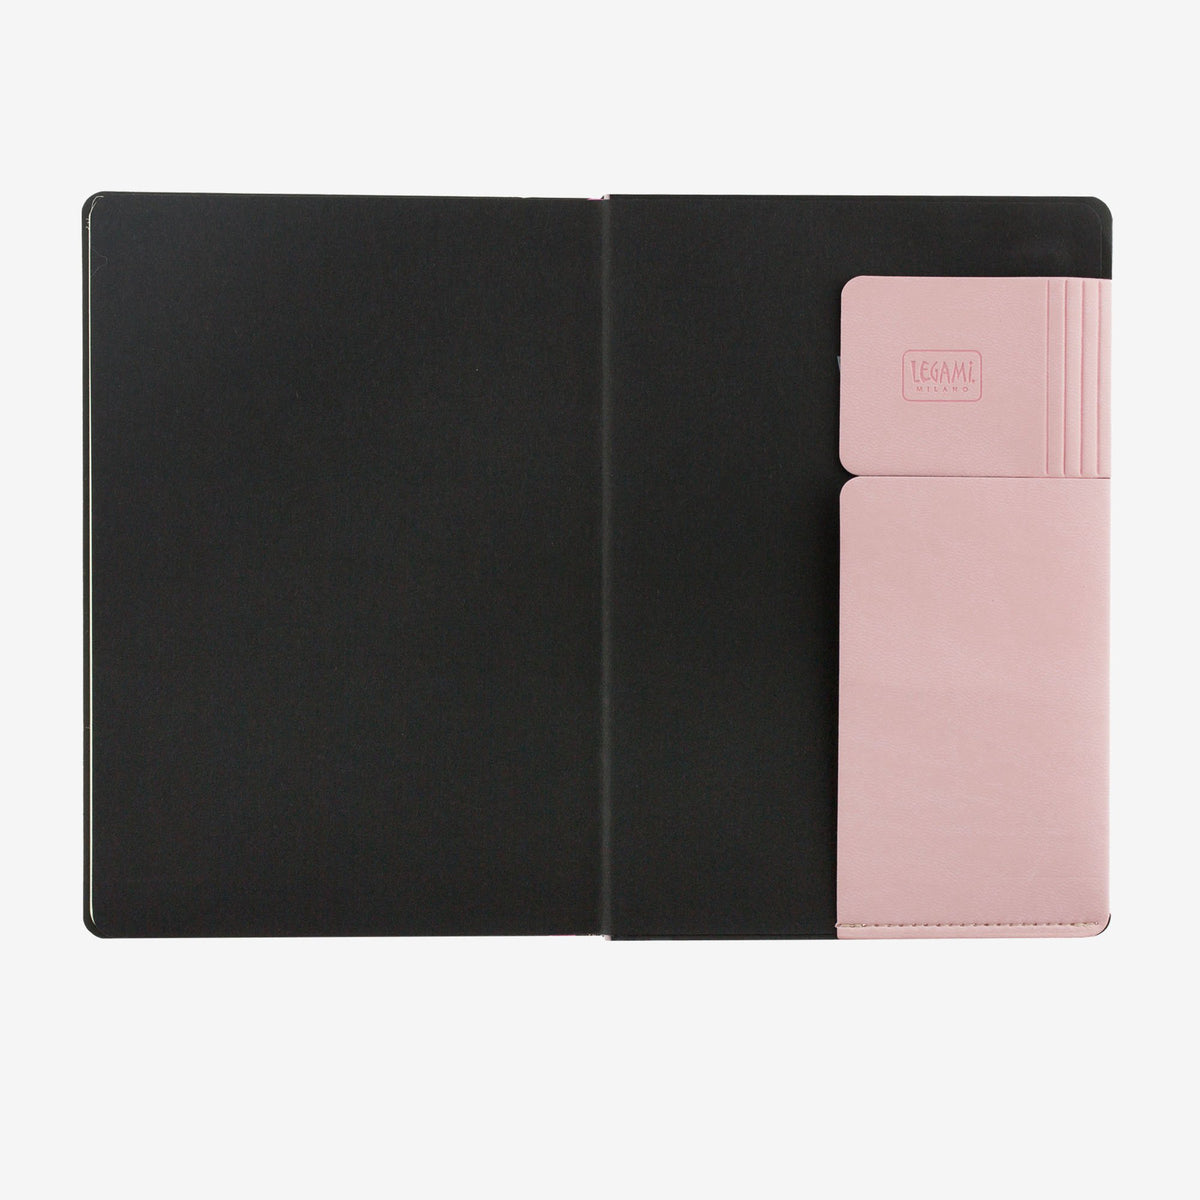 My notebook pink last page legami gifts gift ideas gifting made simple